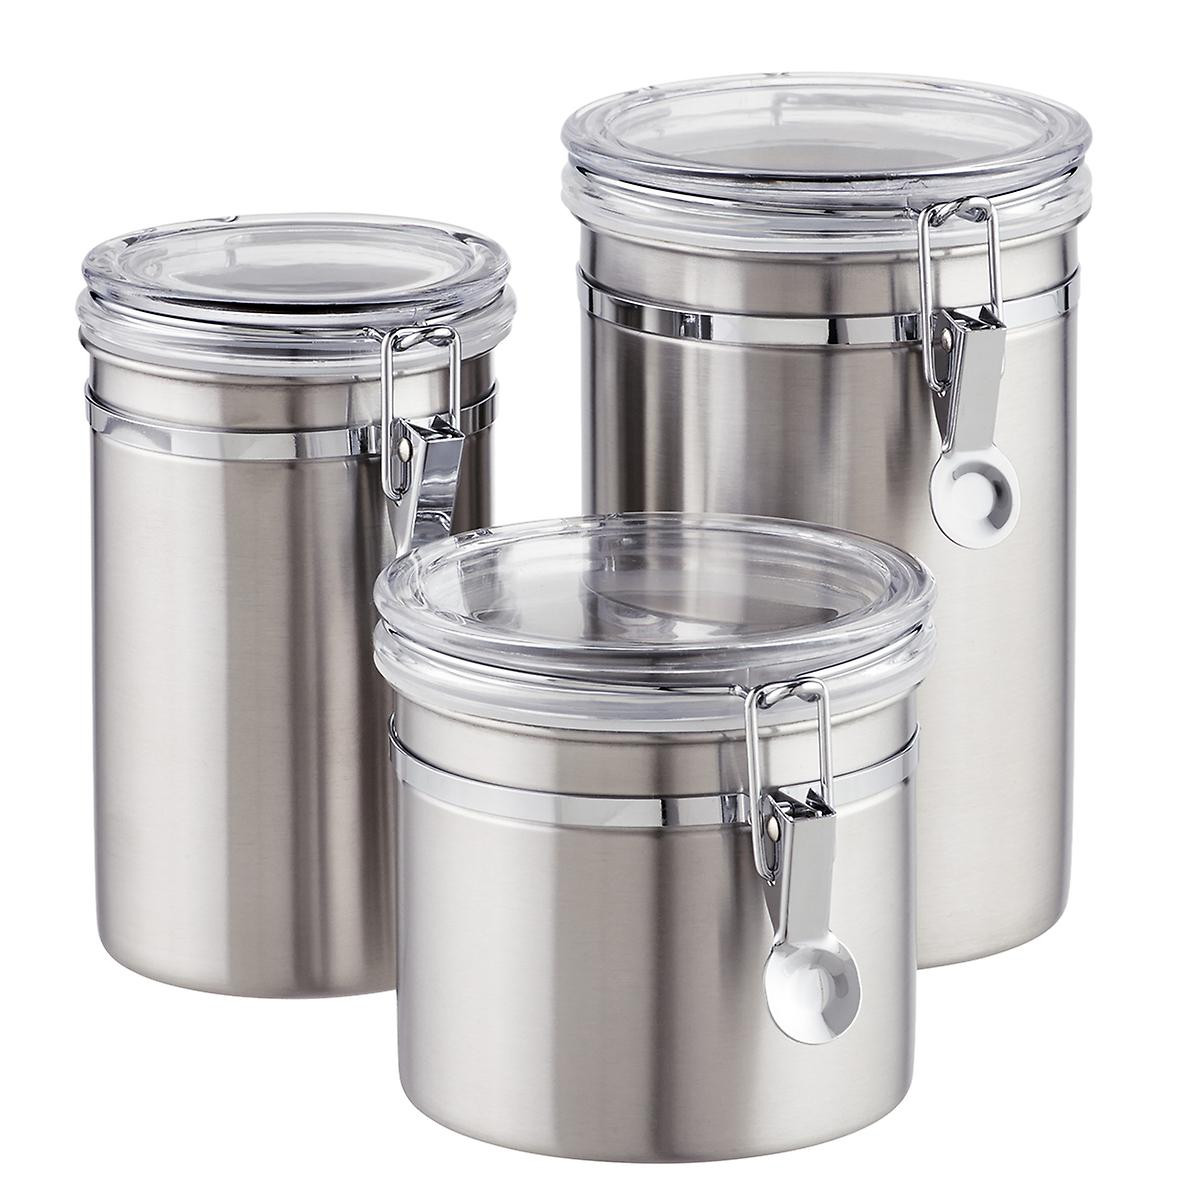 Storage Containers For Kitchen
 Stainless Steel Canisters Brushed Stainless Steel